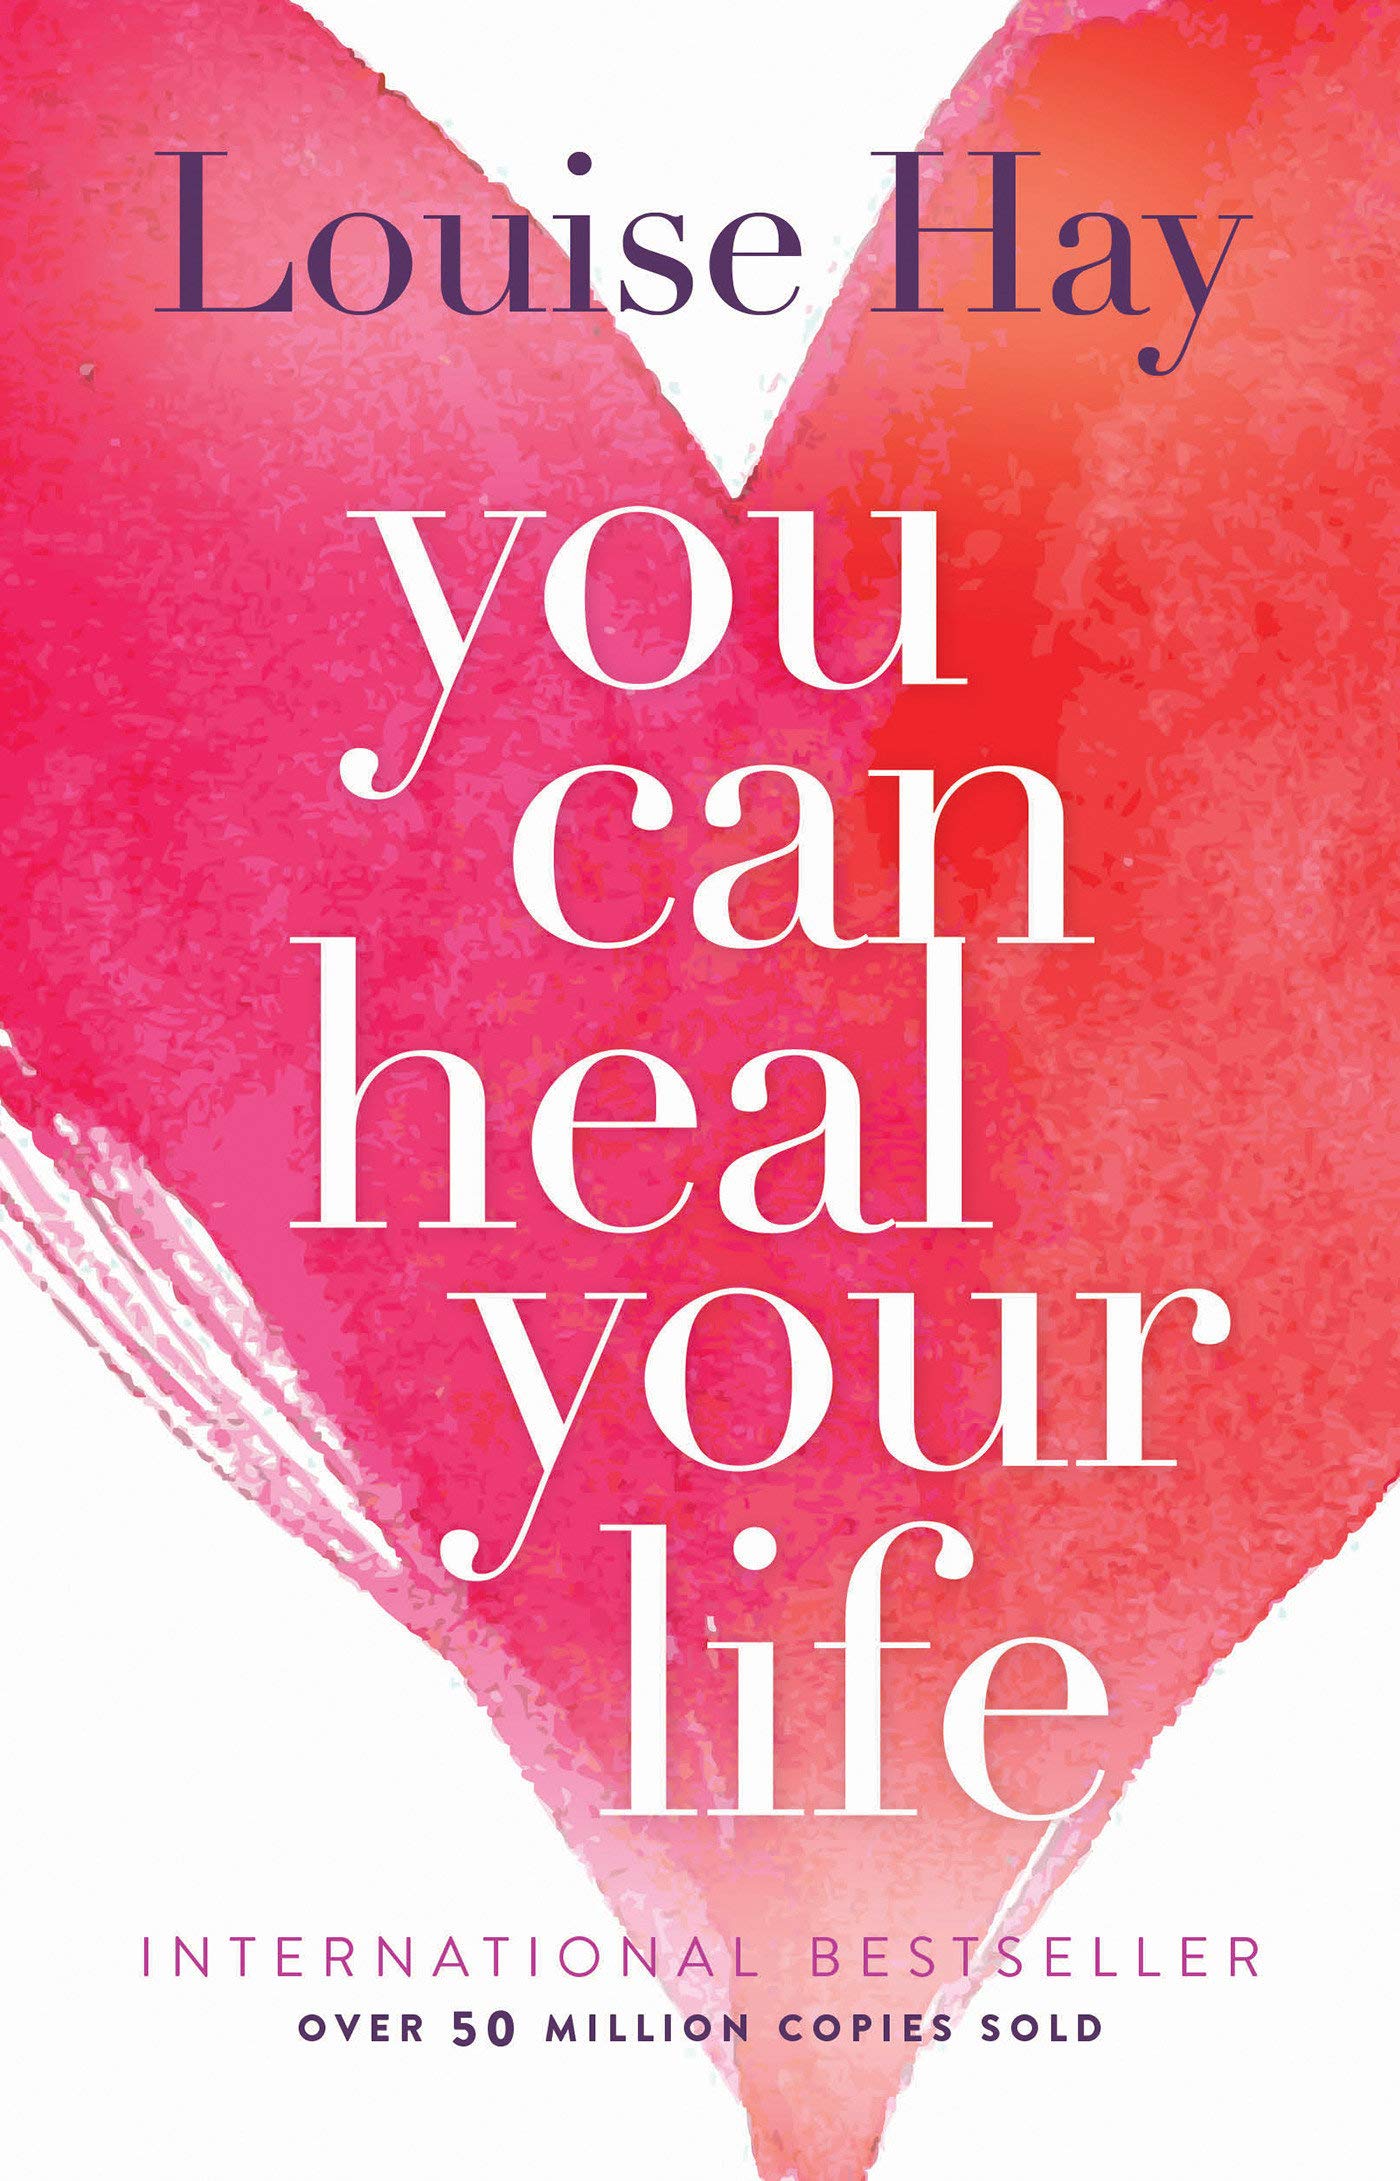 Words of Wisdom from You Can Heal Your Life by Louise Hay